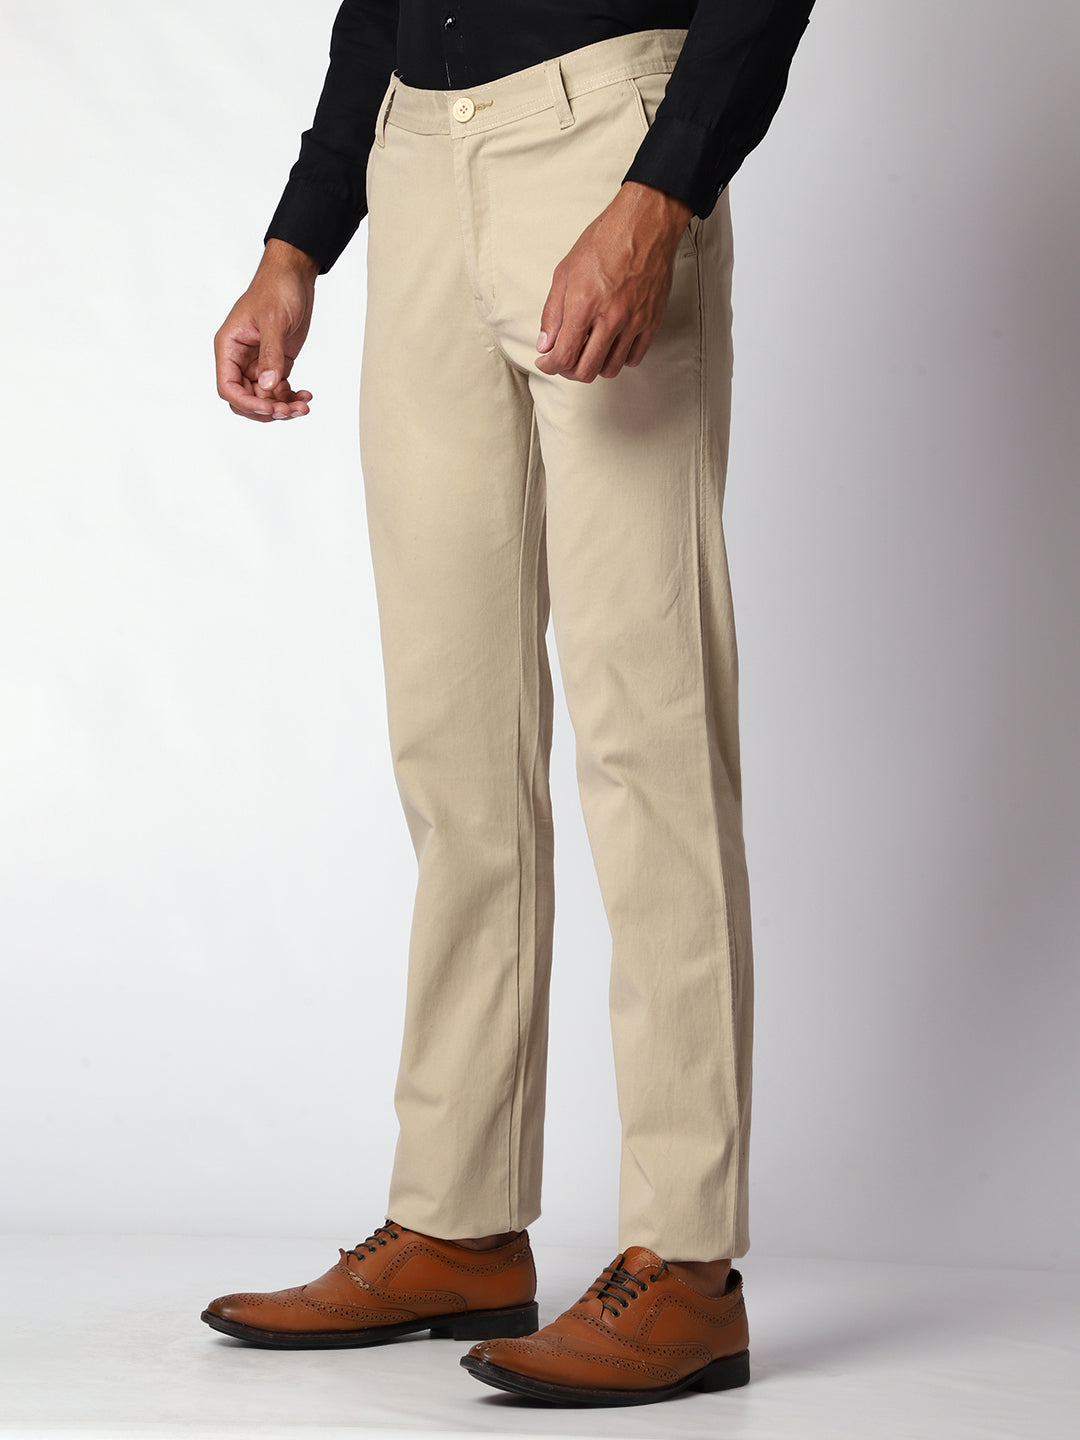 Beige Casual Chinos For Men.